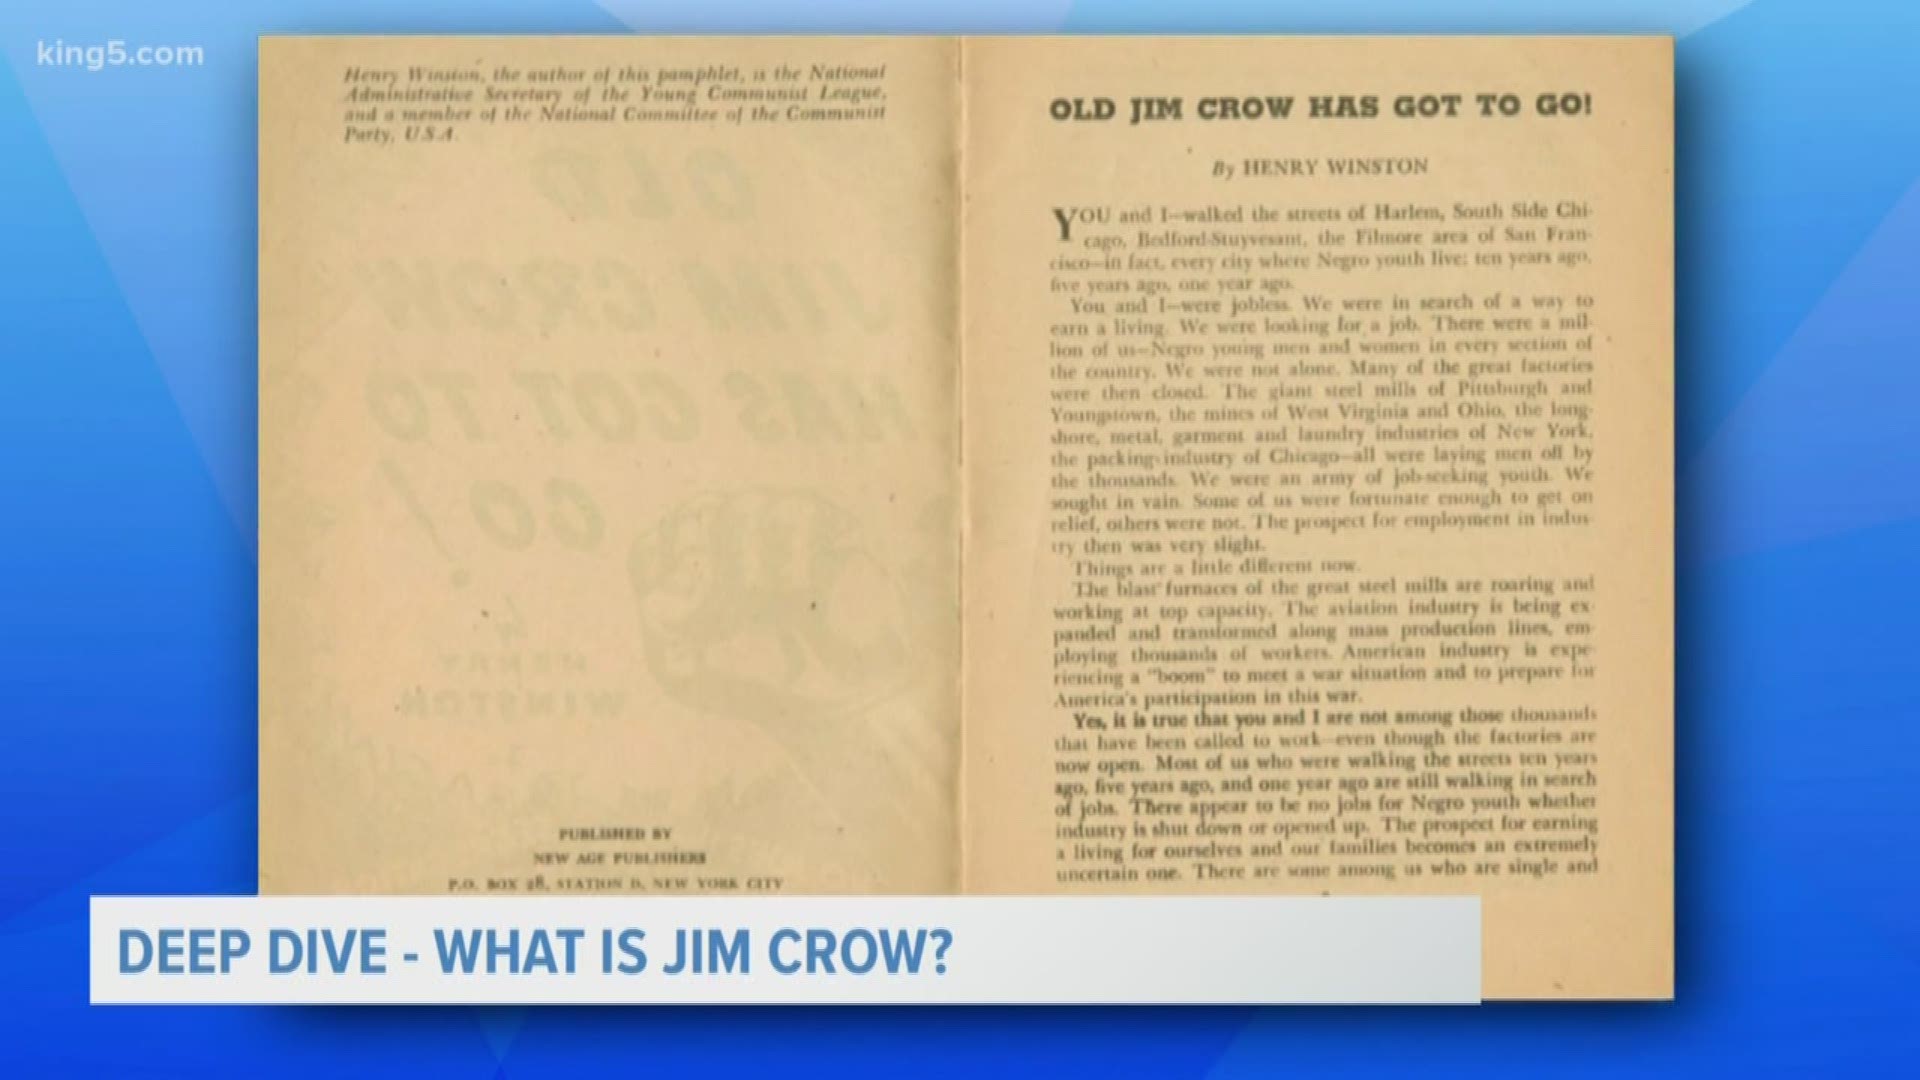 Deep Dive: The legacy of Jim Crow and is it really similar to Washington's I-1000 measure on affirmative action? KING 5's Angela Russell take a closer look at Take 5